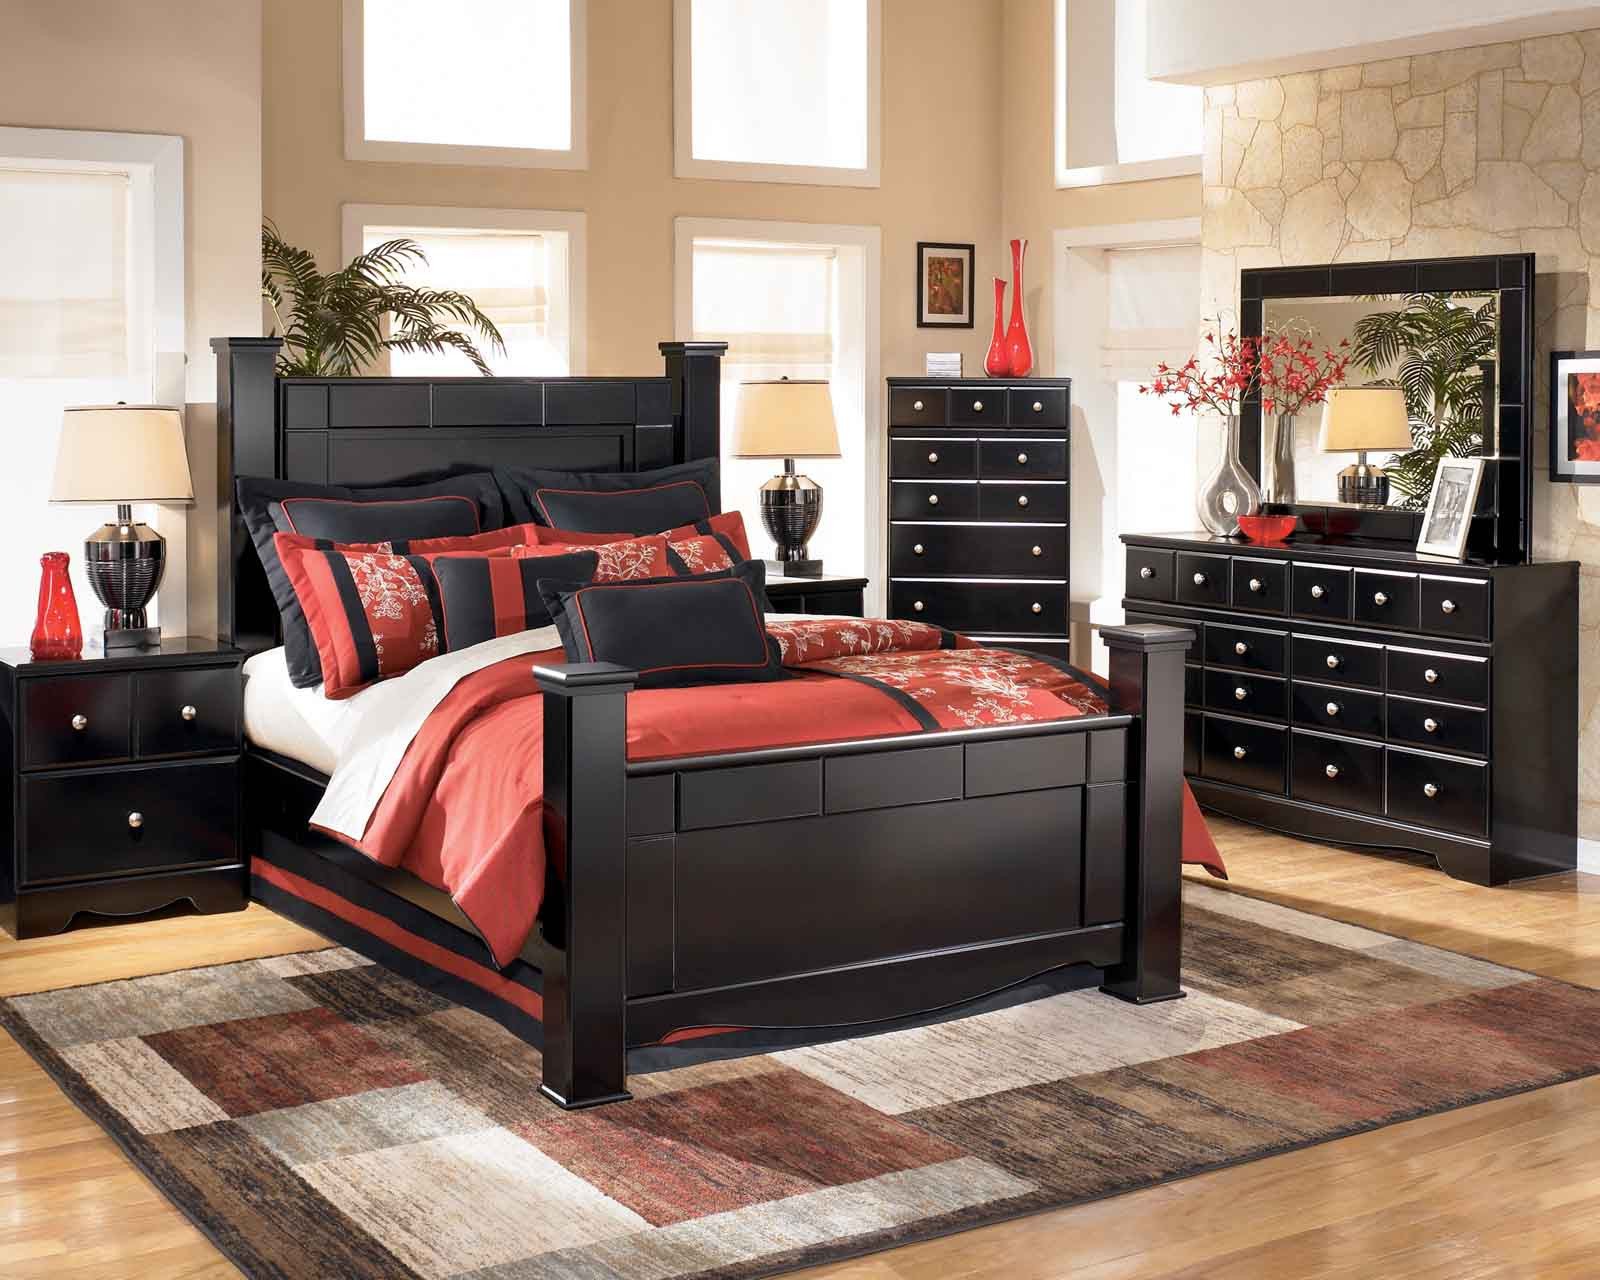 King Size Bedroom Set with Mattress Beautiful Shay Poster Bedroom Set In Black